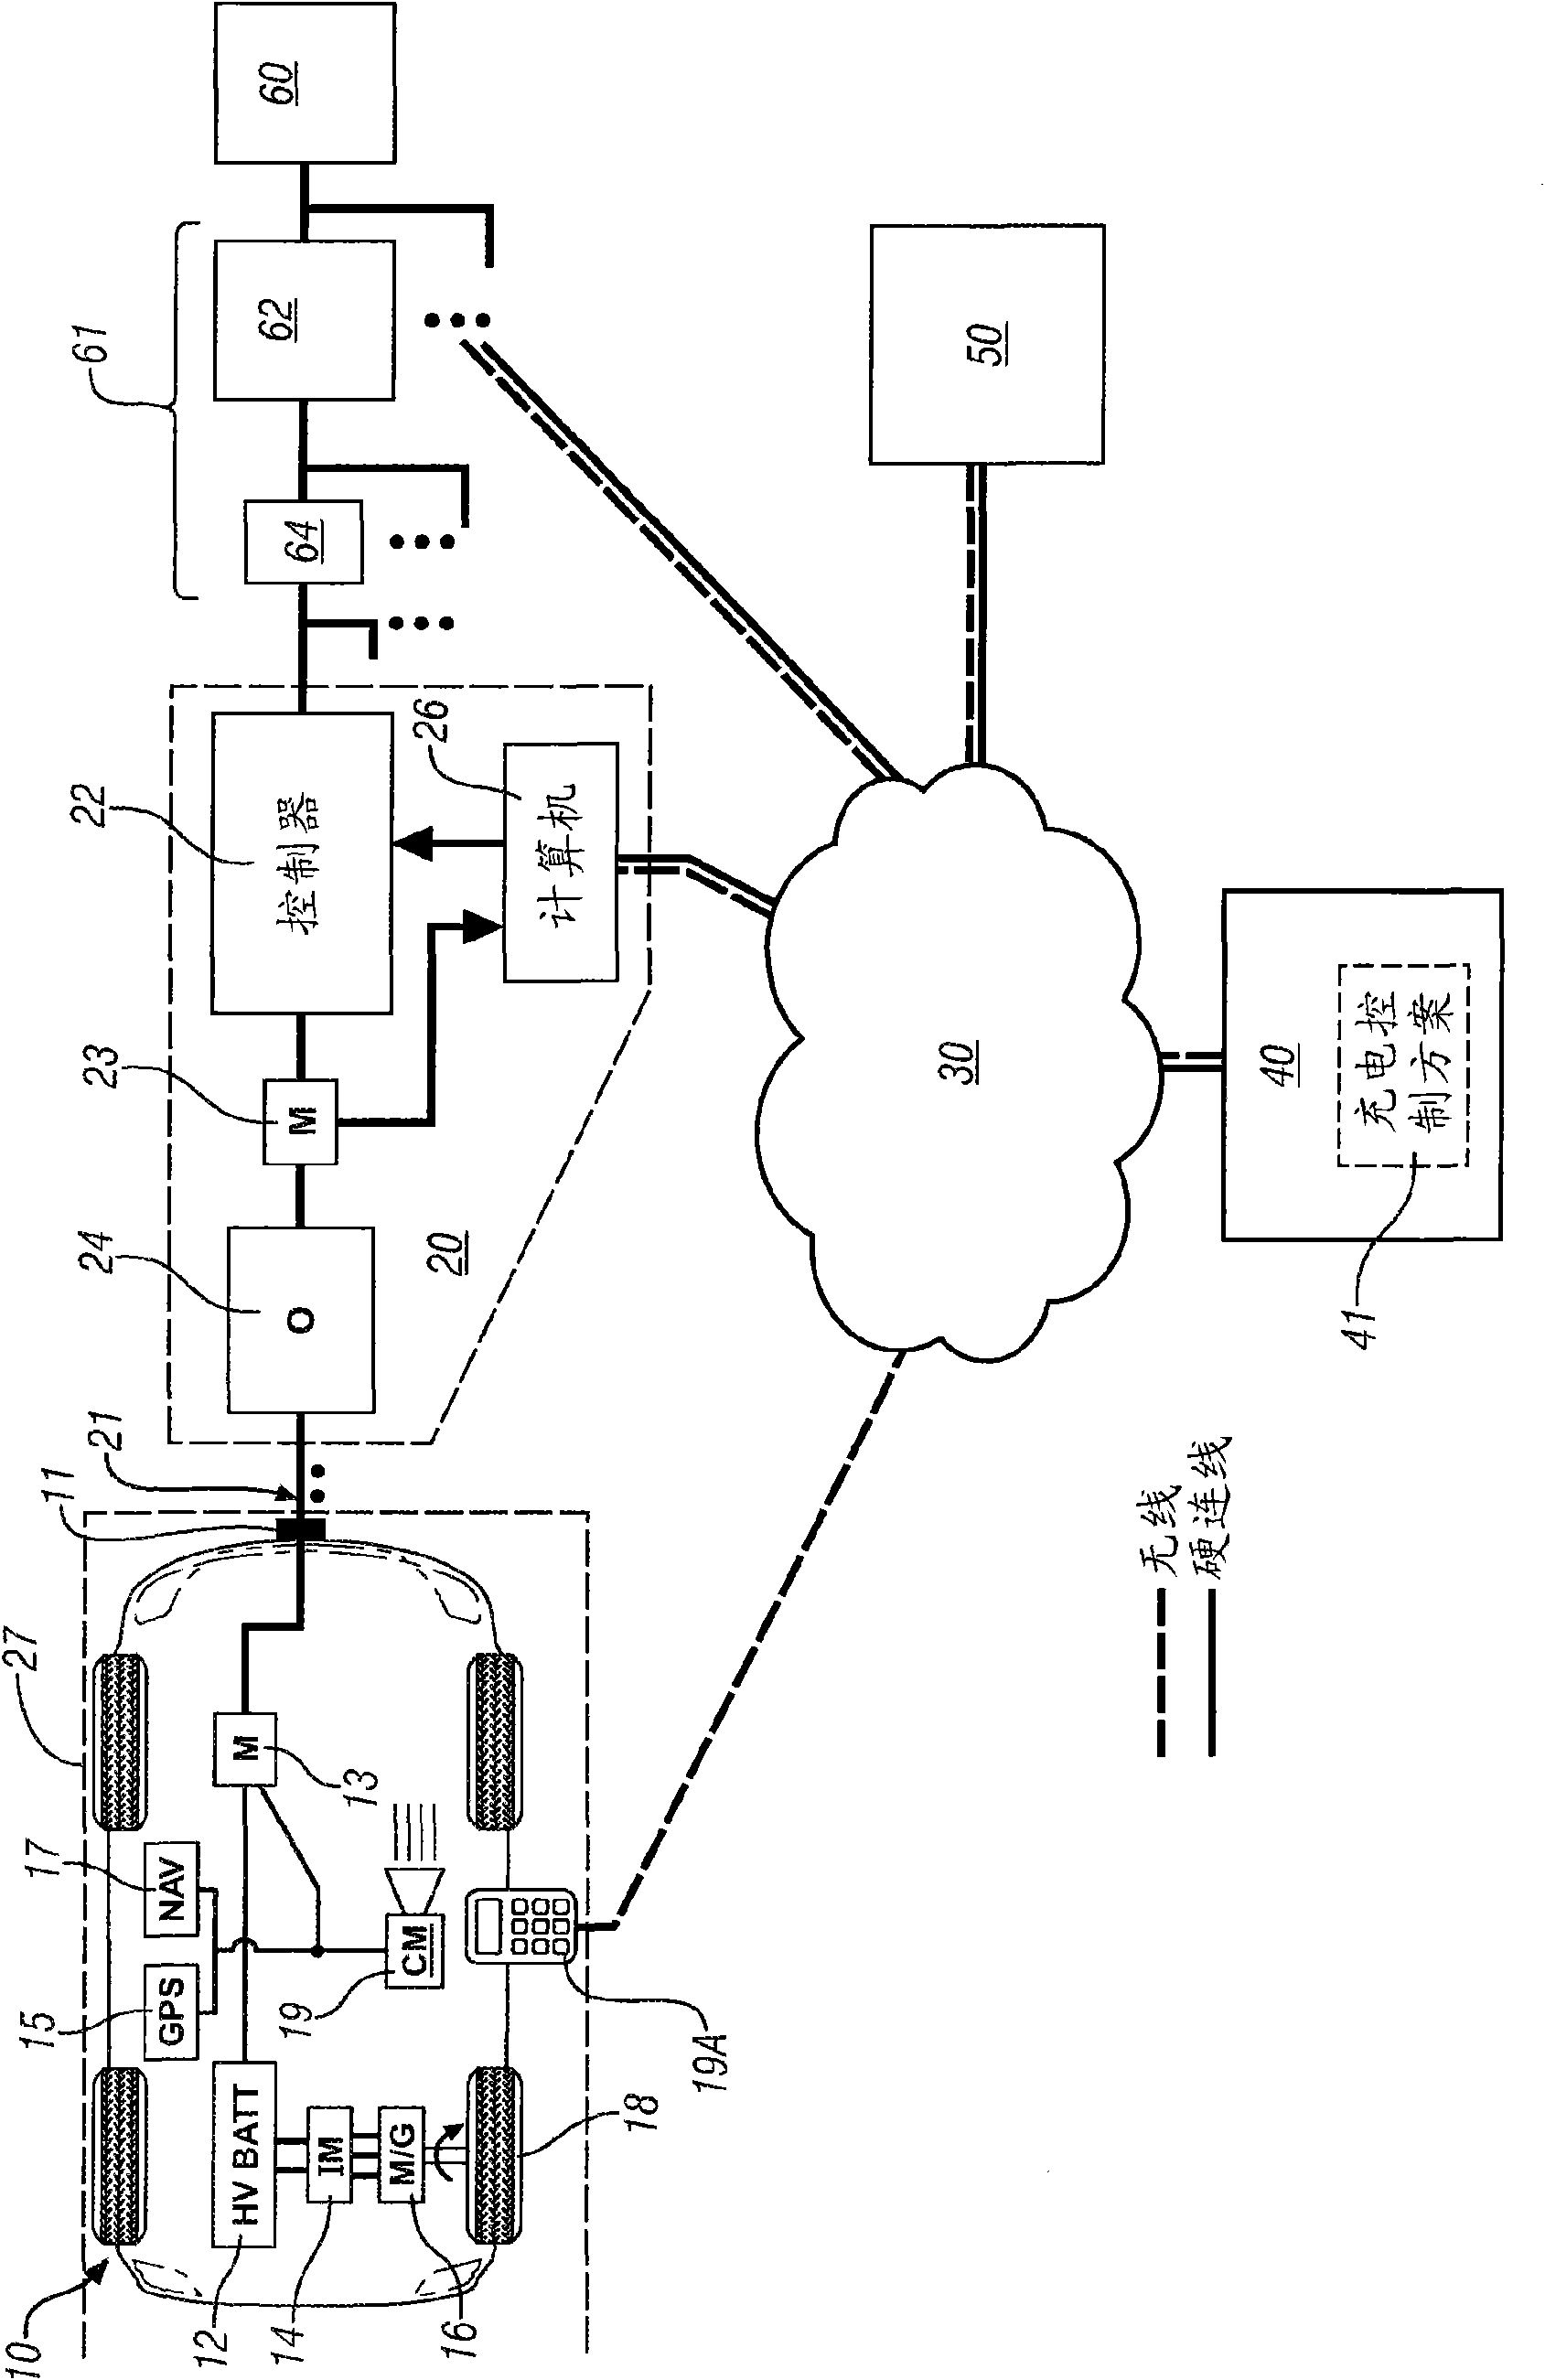 Method for managing electric vehicle charging loads on a local electric power infrastructure